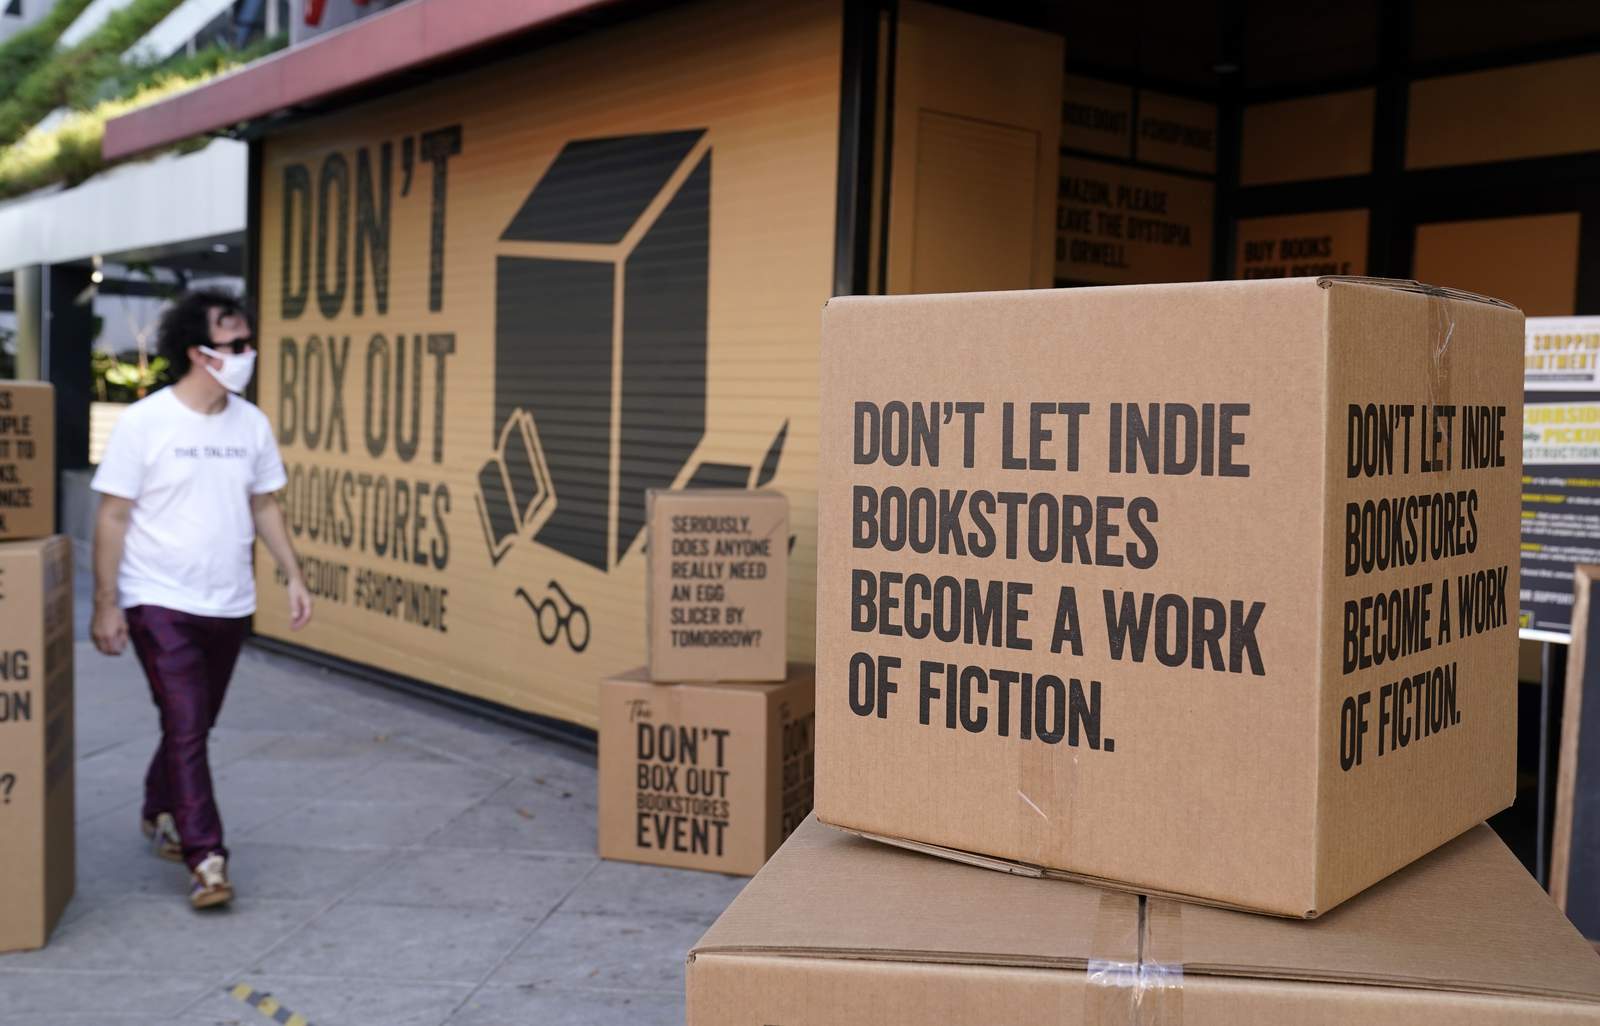 Publishing saw upheaval in 2020, but 'books are resilient'